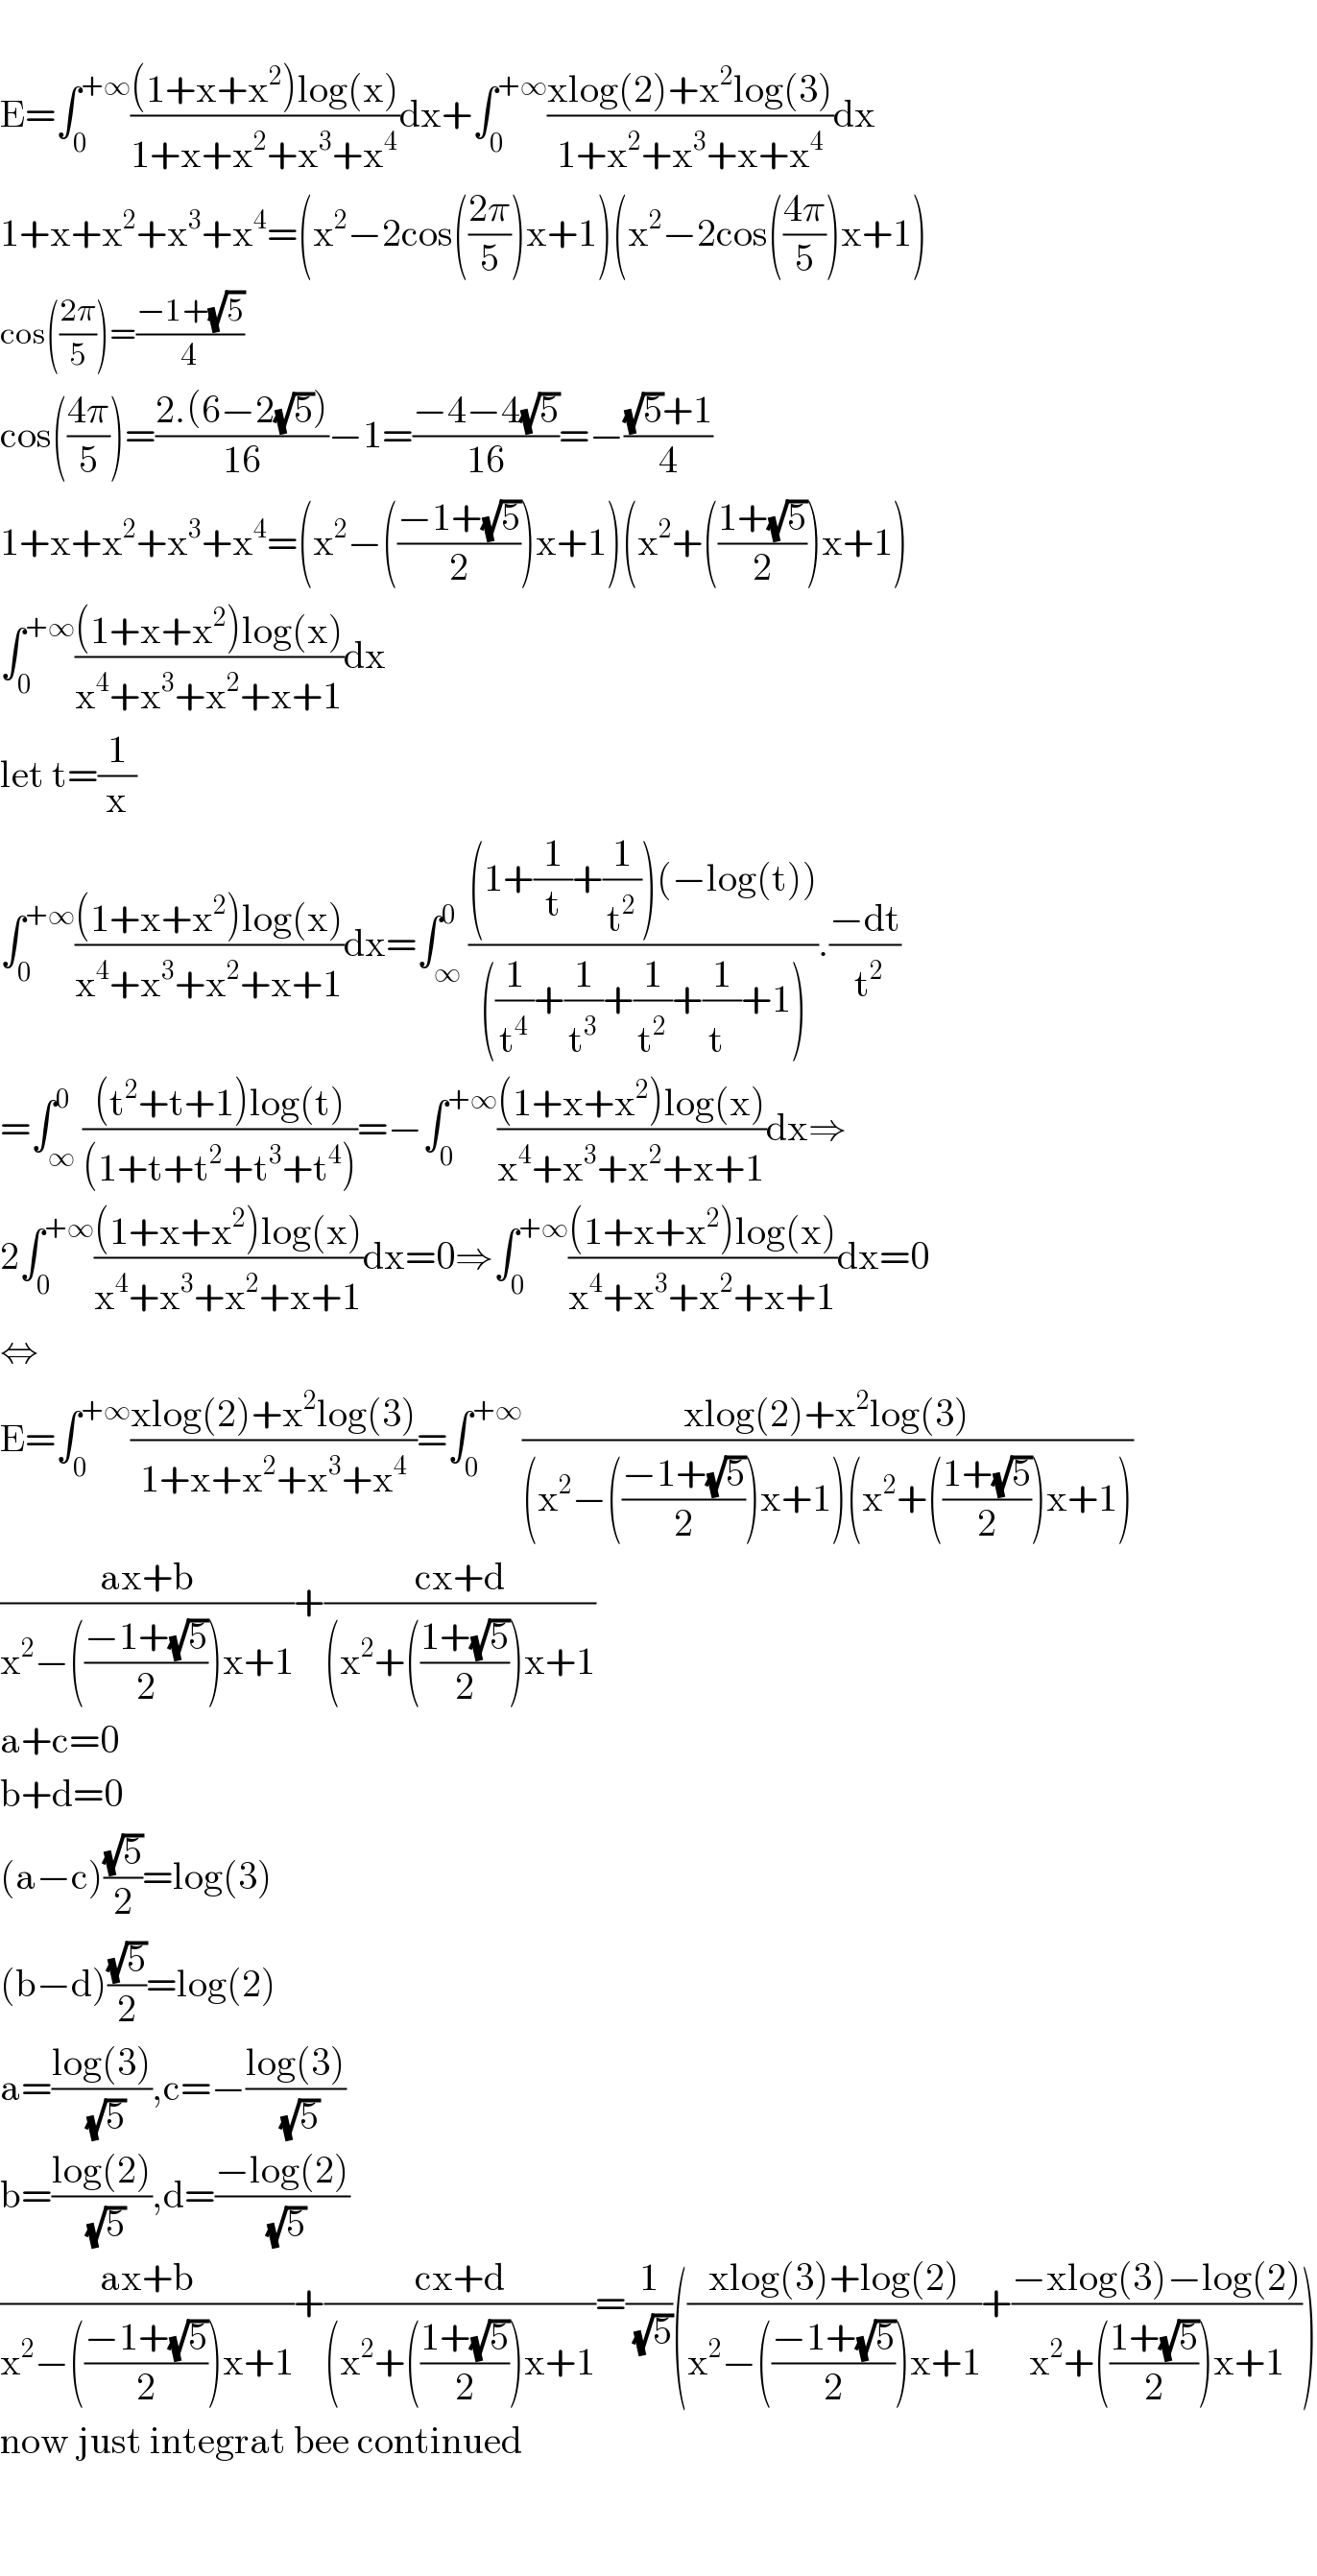   E=∫_0 ^(+∞) (((1+x+x^2 )log(x))/(1+x+x^2 +x^3 +x^4 ))dx+∫_0 ^(+∞) ((xlog(2)+x^2 log(3))/(1+x^2 +x^3 +x+x^4 ))dx  1+x+x^2 +x^3 +x^4 =(x^2 −2cos(((2π)/5))x+1)(x^2 −2cos(((4π)/5))x+1)  cos(((2π)/5))=((−1+(√5))/4)  cos(((4π)/5))=((2.(6−2(√5)))/(16))−1=((−4−4(√5))/(16))=−(((√5)+1)/4)  1+x+x^2 +x^3 +x^4 =(x^2 −(((−1+(√5))/2))x+1)(x^2 +(((1+(√5))/2))x+1)  ∫_0 ^(+∞) (((1+x+x^2 )log(x))/(x^4 +x^3 +x^2 +x+1))dx  let t=(1/x)  ∫_0 ^(+∞) (((1+x+x^2 )log(x))/(x^4 +x^3 +x^2 +x+1))dx=∫_∞ ^0 (((1+(1/t)+(1/t^2 ))(−log(t)))/(((1/t^4 )+(1/t^3 )+(1/t^2 )+(1/t^ )+1))).((−dt)/( t^2 ))  =∫_∞ ^0 (((t^2 +t+1)log(t))/((1+t+t^2 +t^3 +t^4 )))=−∫_0 ^(+∞) (((1+x+x^2 )log(x))/(x^4 +x^3 +x^2 +x+1))dx⇒  2∫_0 ^(+∞) (((1+x+x^2 )log(x))/(x^4 +x^3 +x^2 +x+1))dx=0⇒∫_0 ^(+∞) (((1+x+x^2 )log(x))/(x^4 +x^3 +x^2 +x+1))dx=0  ⇔  E=∫_0 ^(+∞) ((xlog(2)+x^2 log(3))/(1+x+x^2 +x^3 +x^4 ))=∫_0 ^(+∞) ((xlog(2)+x^2 log(3))/((x^2 −(((−1+(√5))/2))x+1)(x^2 +(((1+(√5))/2))x+1)))  ((ax+b)/(x^2 −(((−1+(√5))/2))x+1))+((cx+d)/((x^2 +(((1+(√5))/2))x+1))  a+c=0  b+d=0  (a−c)((√5)/2)=log(3)  (b−d)((√5)/2)=log(2)  a=((log(3))/(√5)),c=−((log(3))/(√5))  b=((log(2))/(√5)),d=((−log(2))/(√5))  ((ax+b)/(x^2 −(((−1+(√5))/2))x+1))+((cx+d)/((x^2 +(((1+(√5))/2))x+1))=(1/(√5))(((xlog(3)+log(2))/(x^2 −(((−1+(√5))/2))x+1))+((−xlog(3)−log(2))/(x^2 +(((1+(√5))/2))x+1)))  now just integrat bee continued      